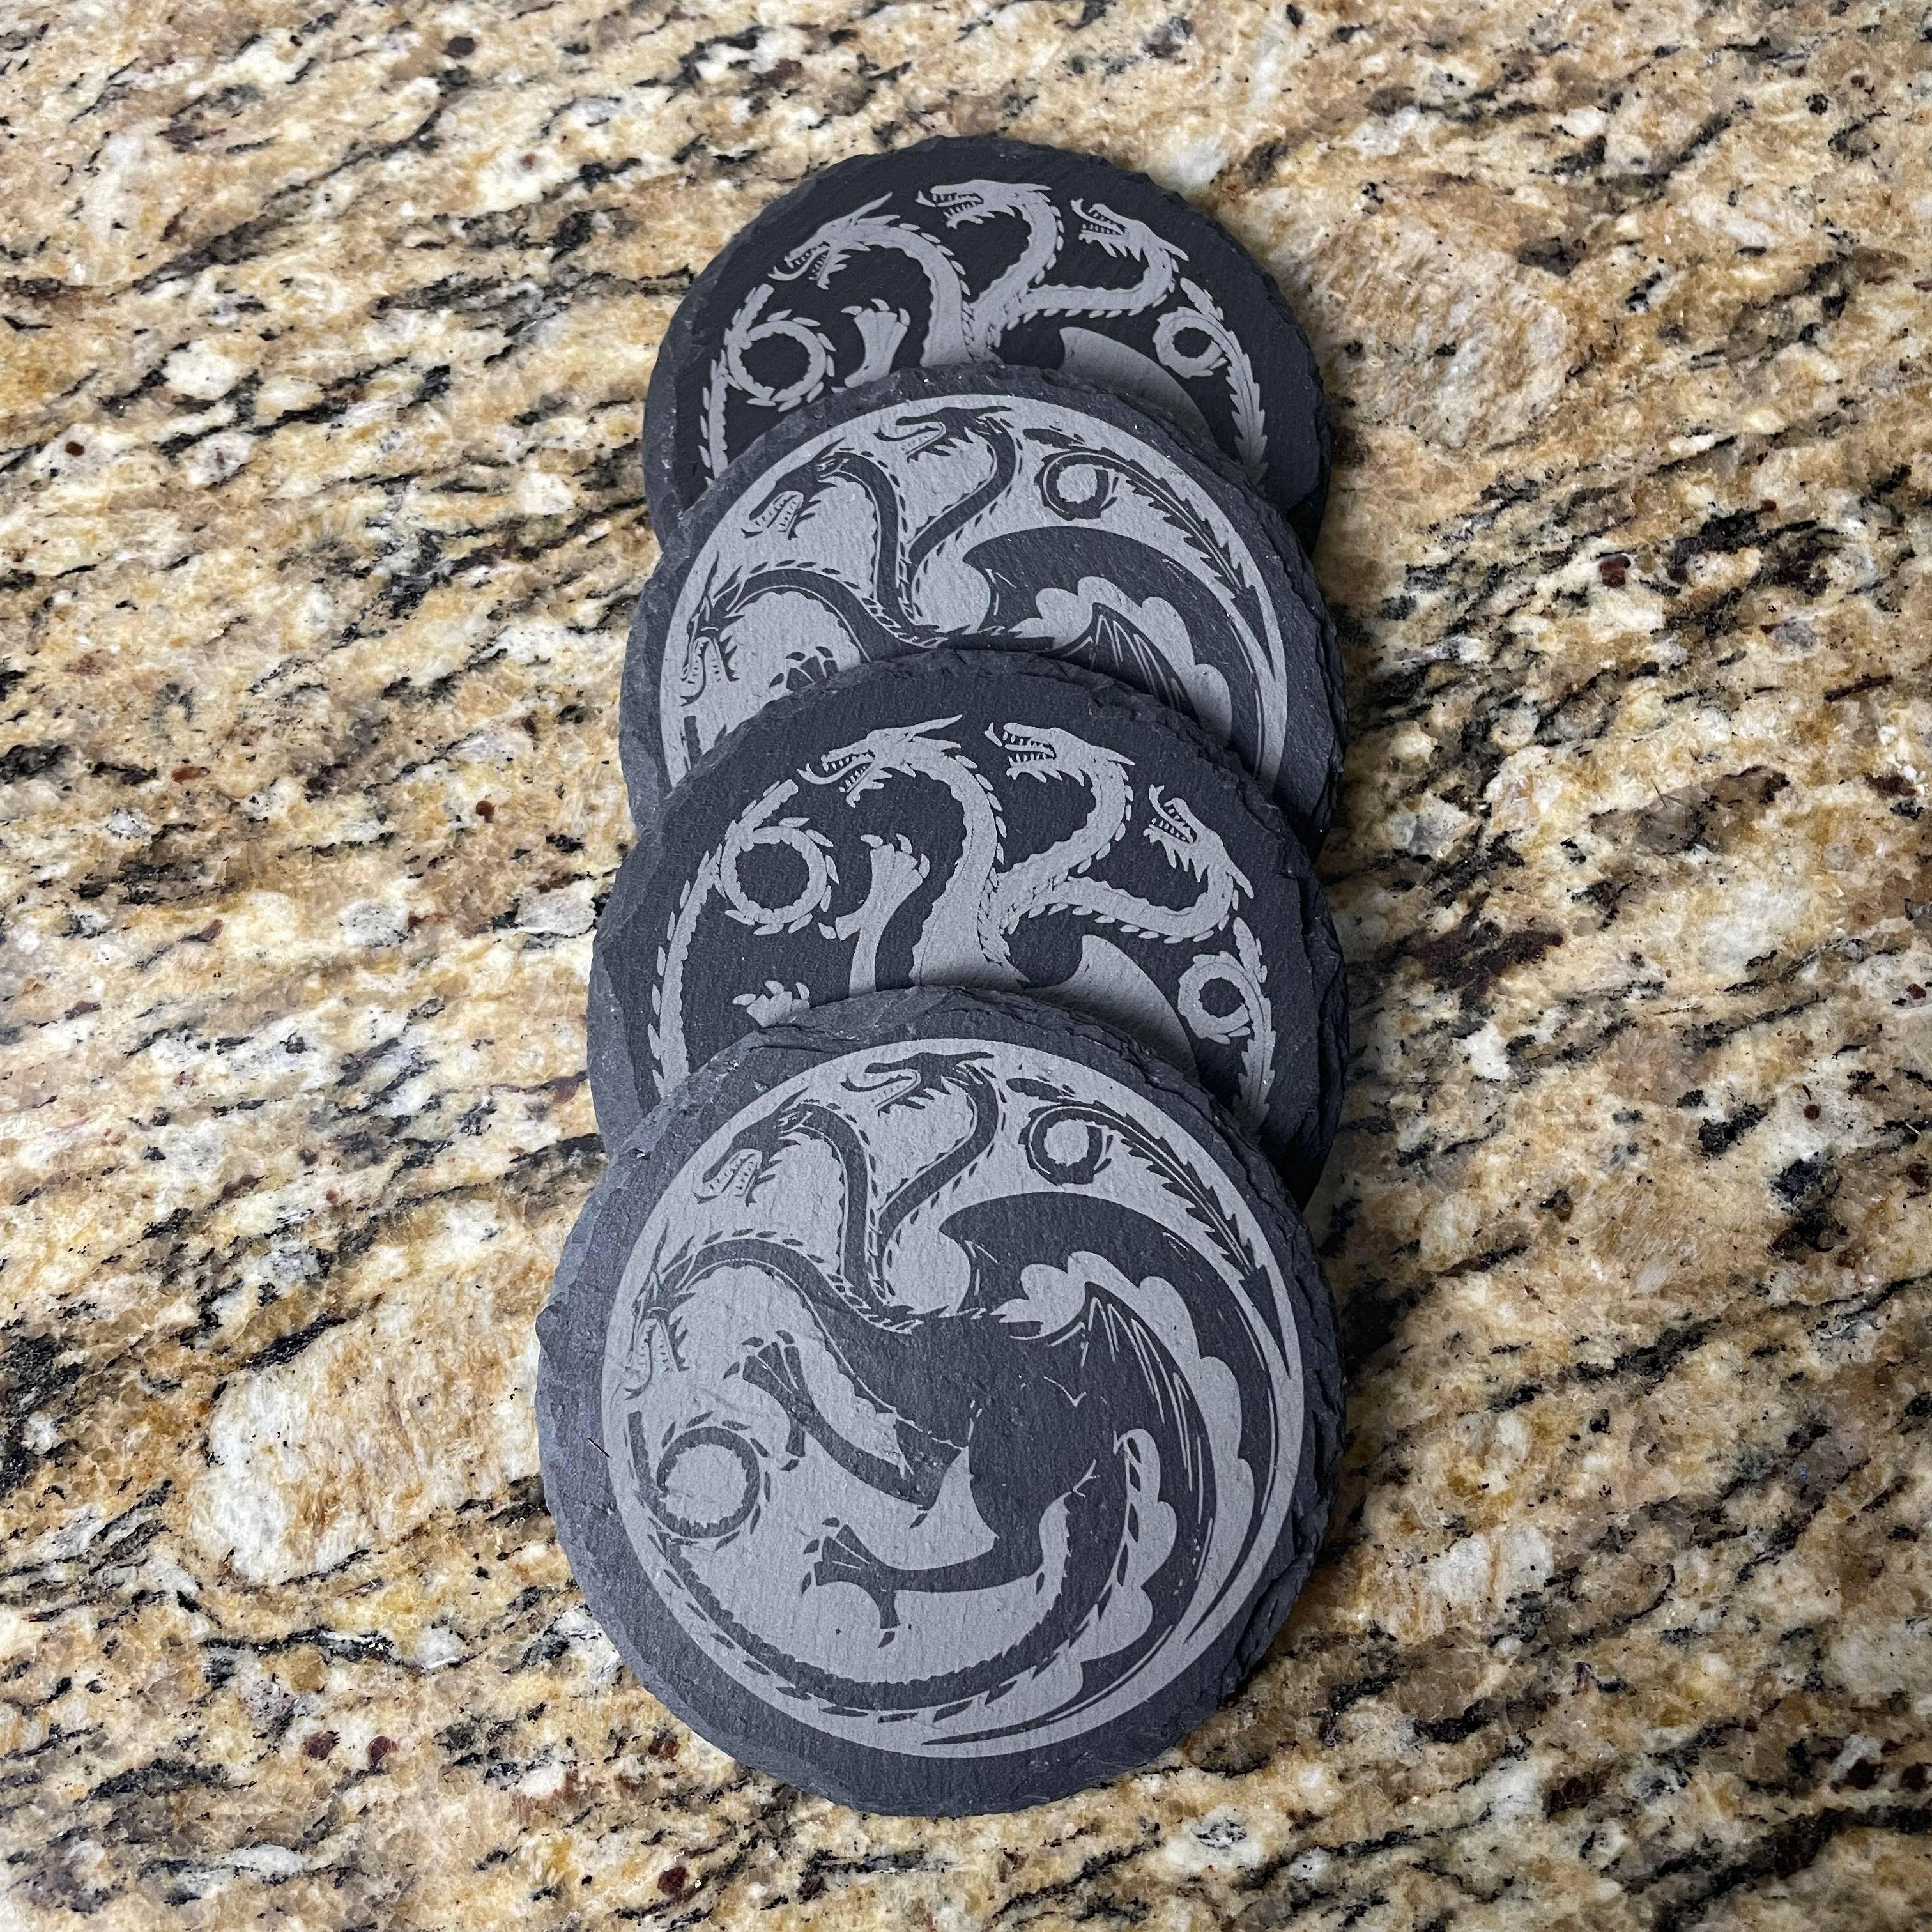 Dragon Inspired Slate Coasters:  Enhance Your Table with Iconic Dragon Design